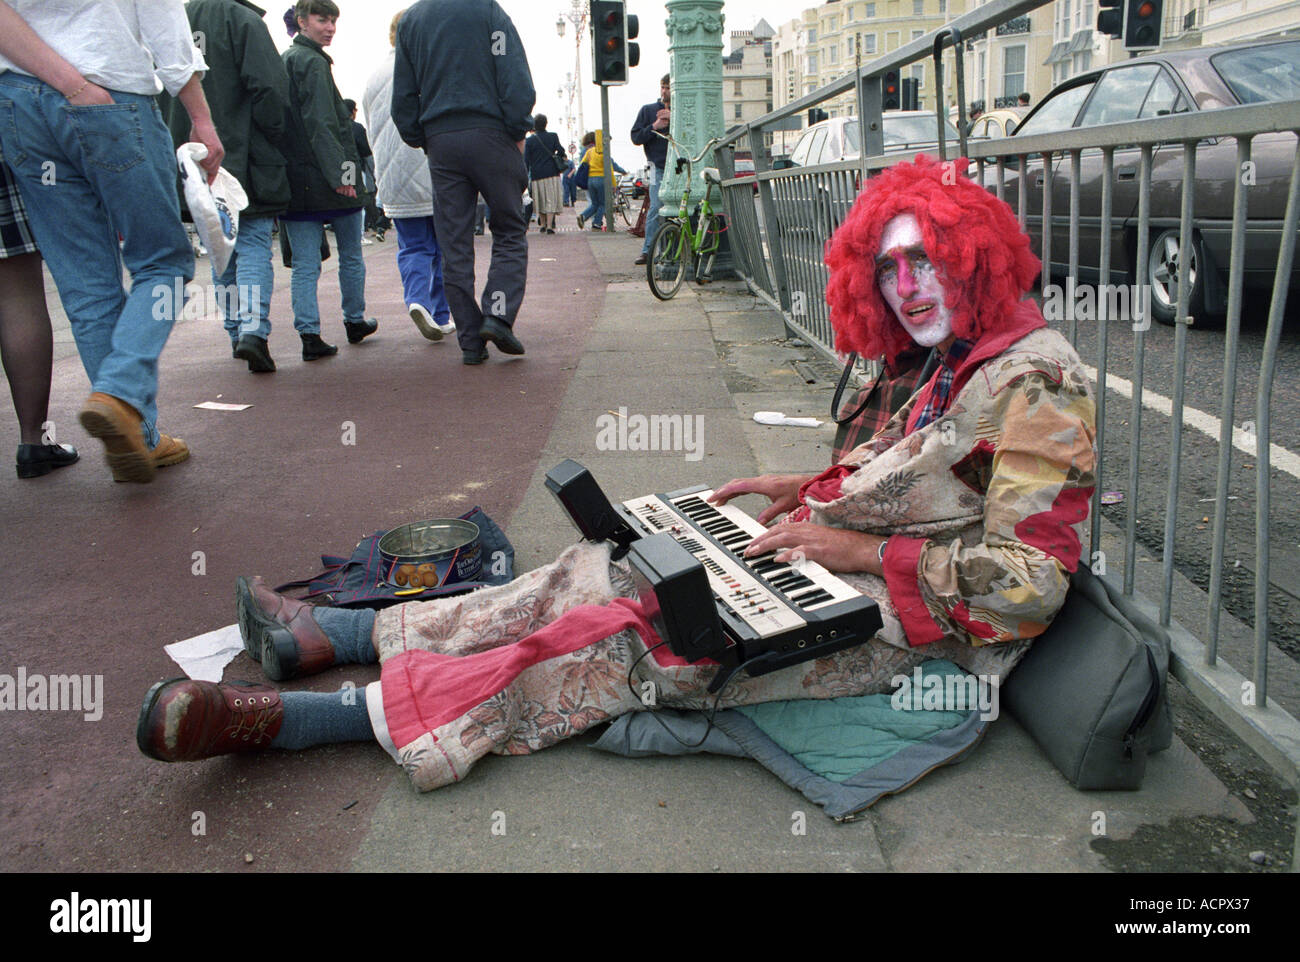 A STREET ENTERTAINER DRESSED AS A CLOWN ON THE SEA FRONT IN BRIGHTON SUSSEX UK Stock Photo